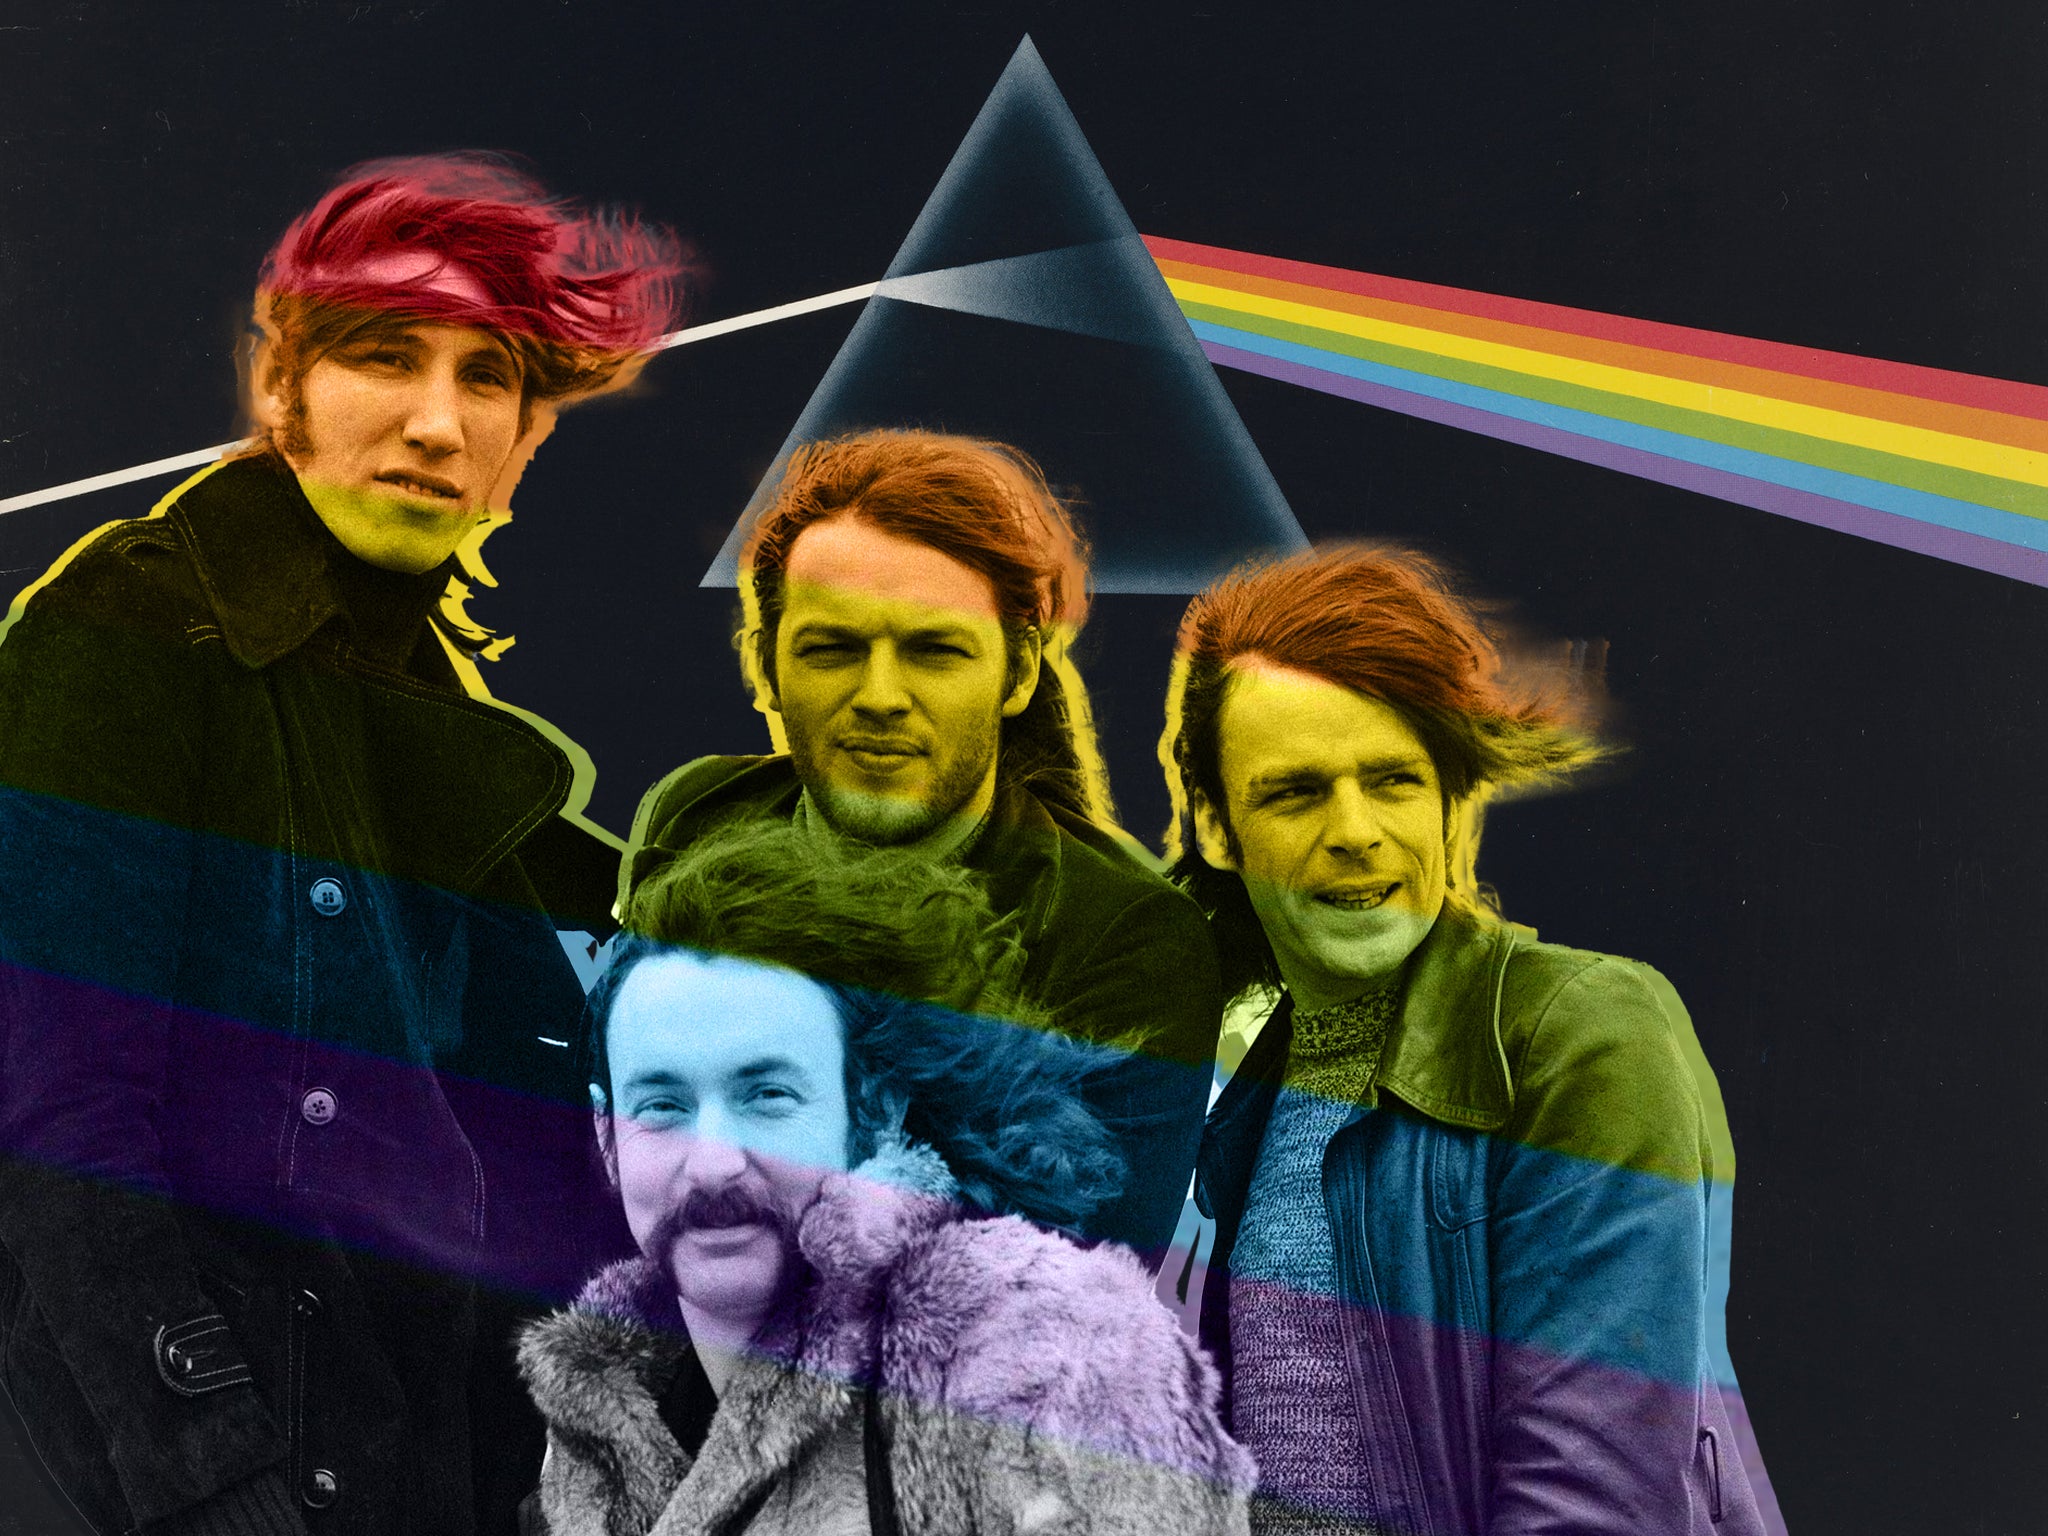 https://static.independent.co.uk/2023/02/27/13/Pink%20Floyd%20Dark%20Side%20of%20the%20Moon%20comp2.jpg